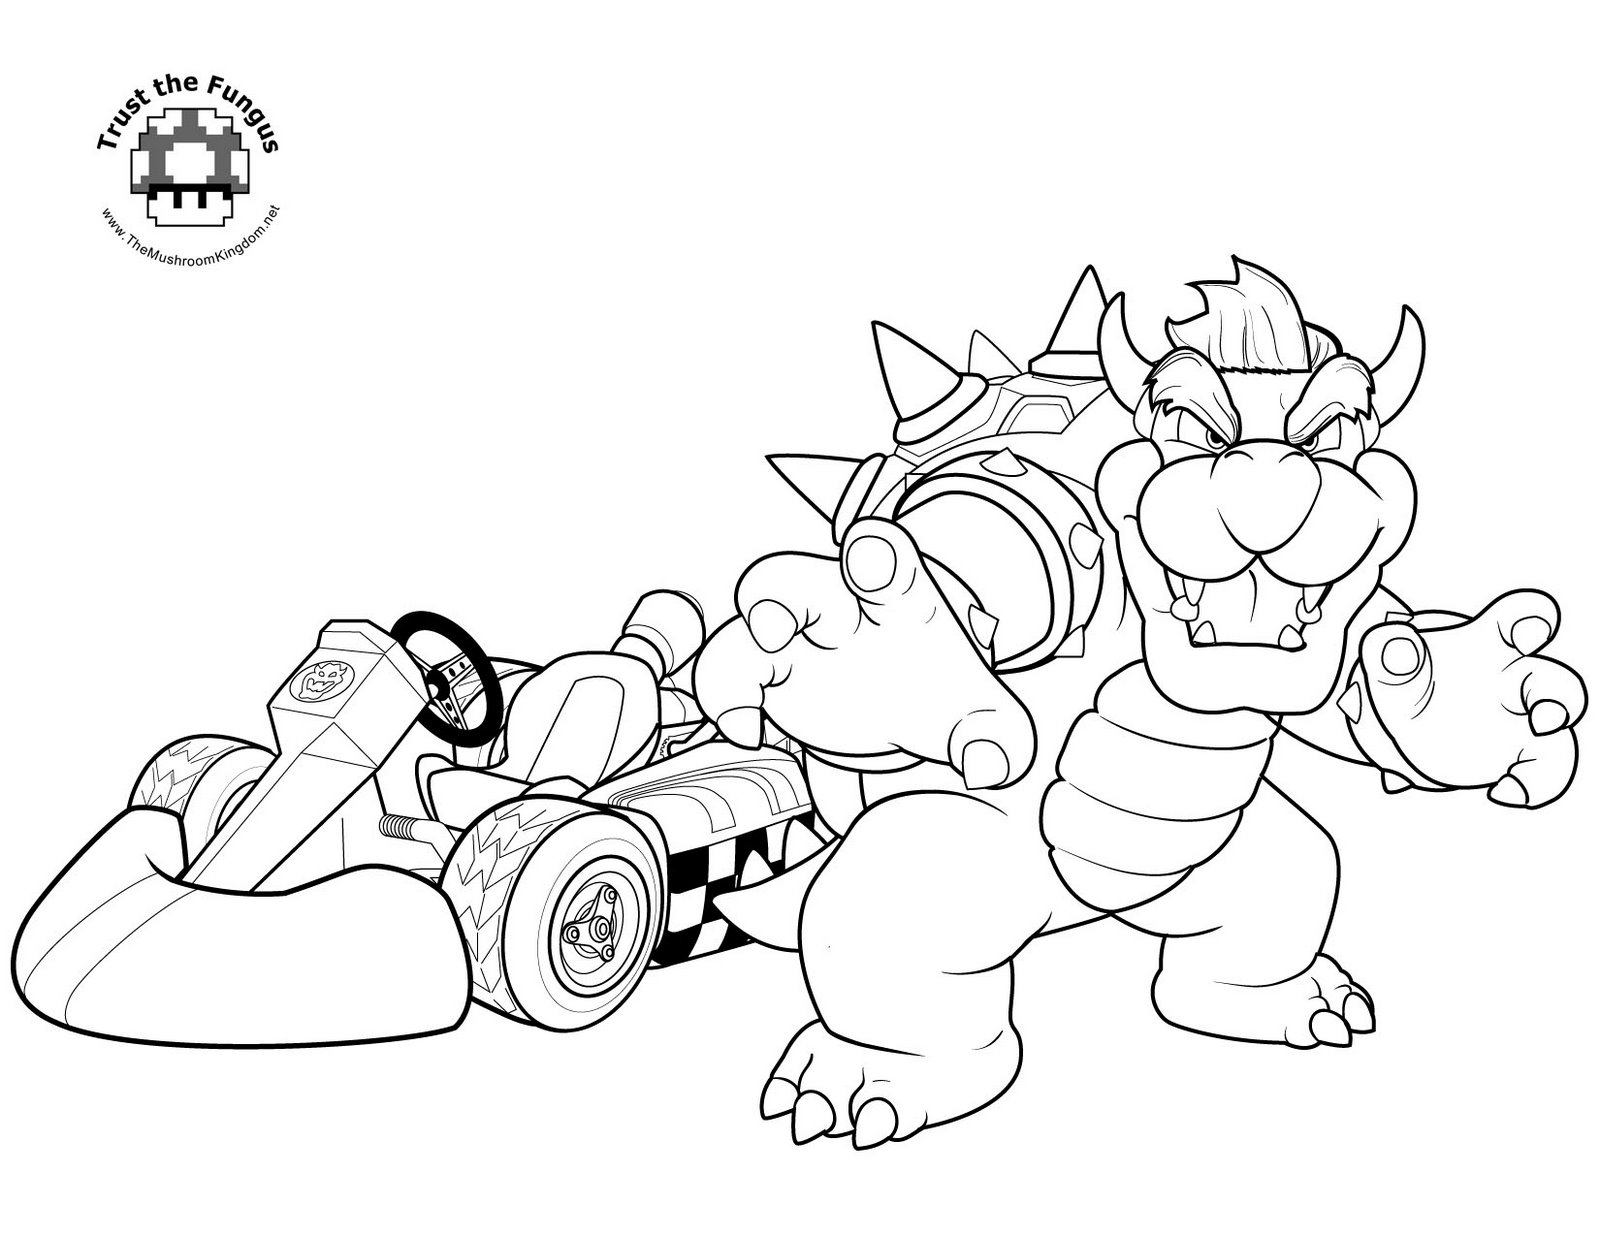 Bowser Coloring Pages - Best Coloring Pages For Kids  Mario coloring  pages, Coloring pages, Super mario coloring pages